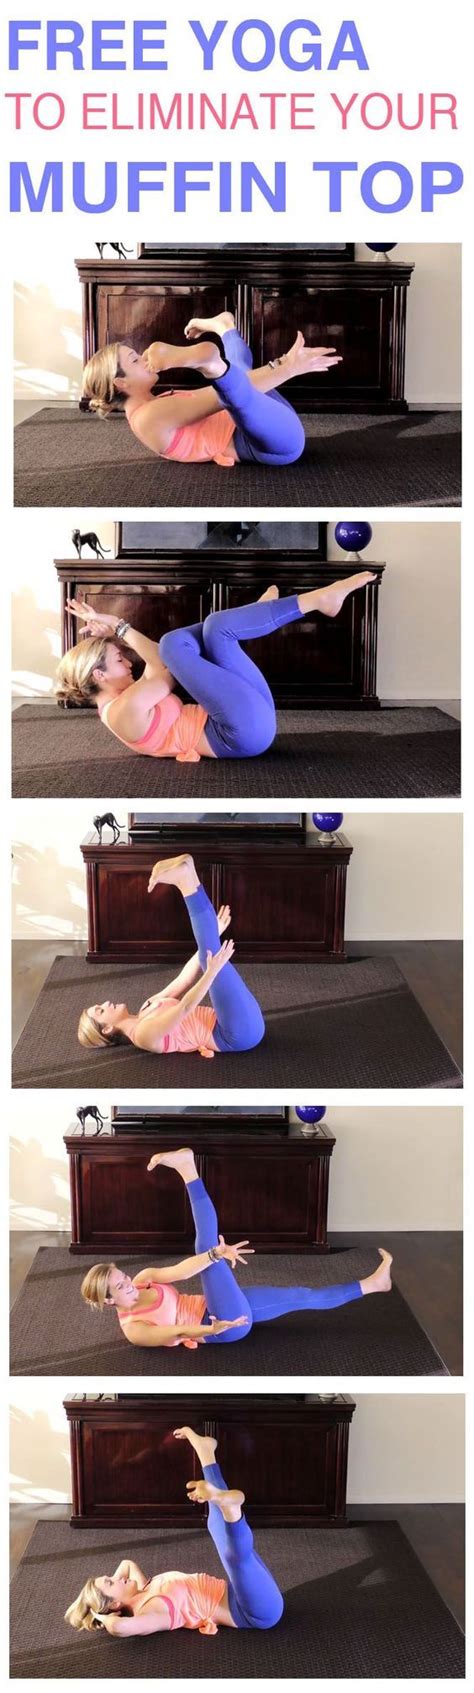 Free Yoga To Eliminate Your Muffin Top Sport Fitness Fitness Workouts